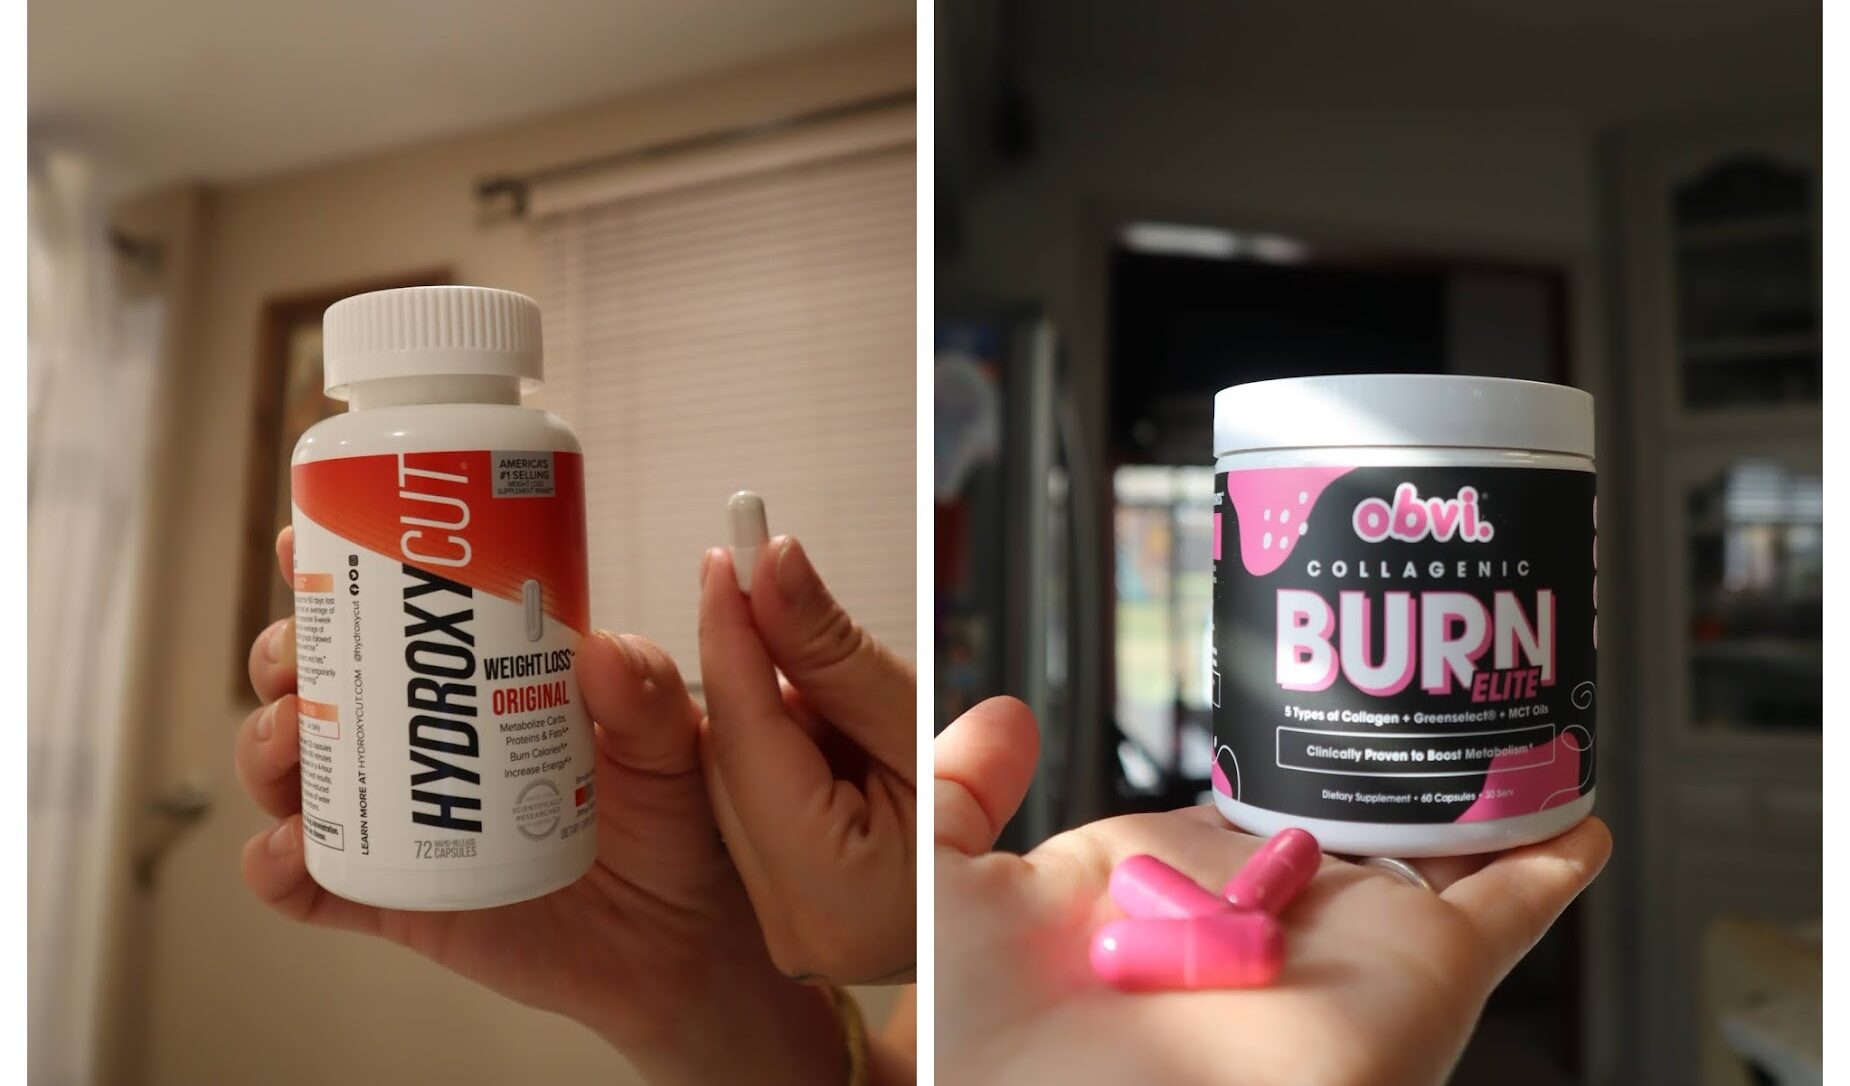 Obvi vs. Hydroxycut: How I Streamlined My Weight Loss Journey